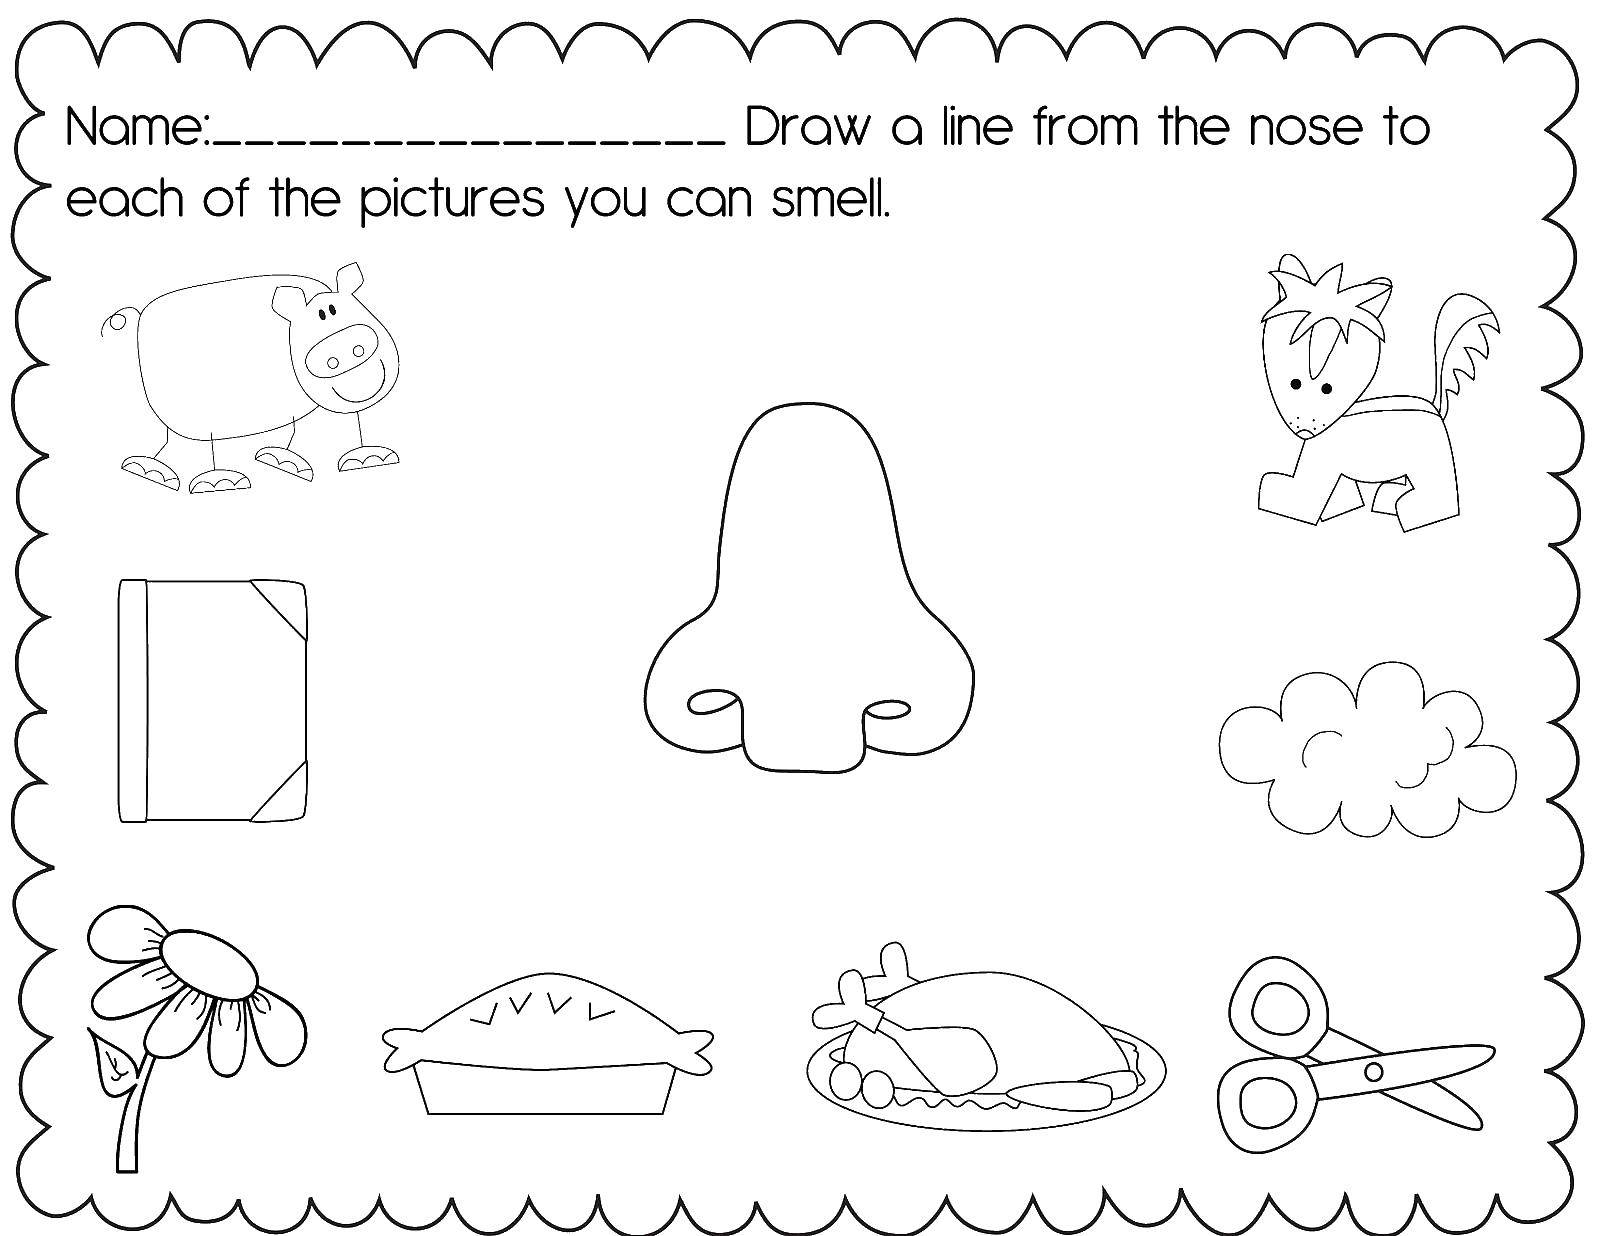 Coloring Connect the lines from the nose to the things that you can smell. Category coloring. Tags:  nose, things, thinking.